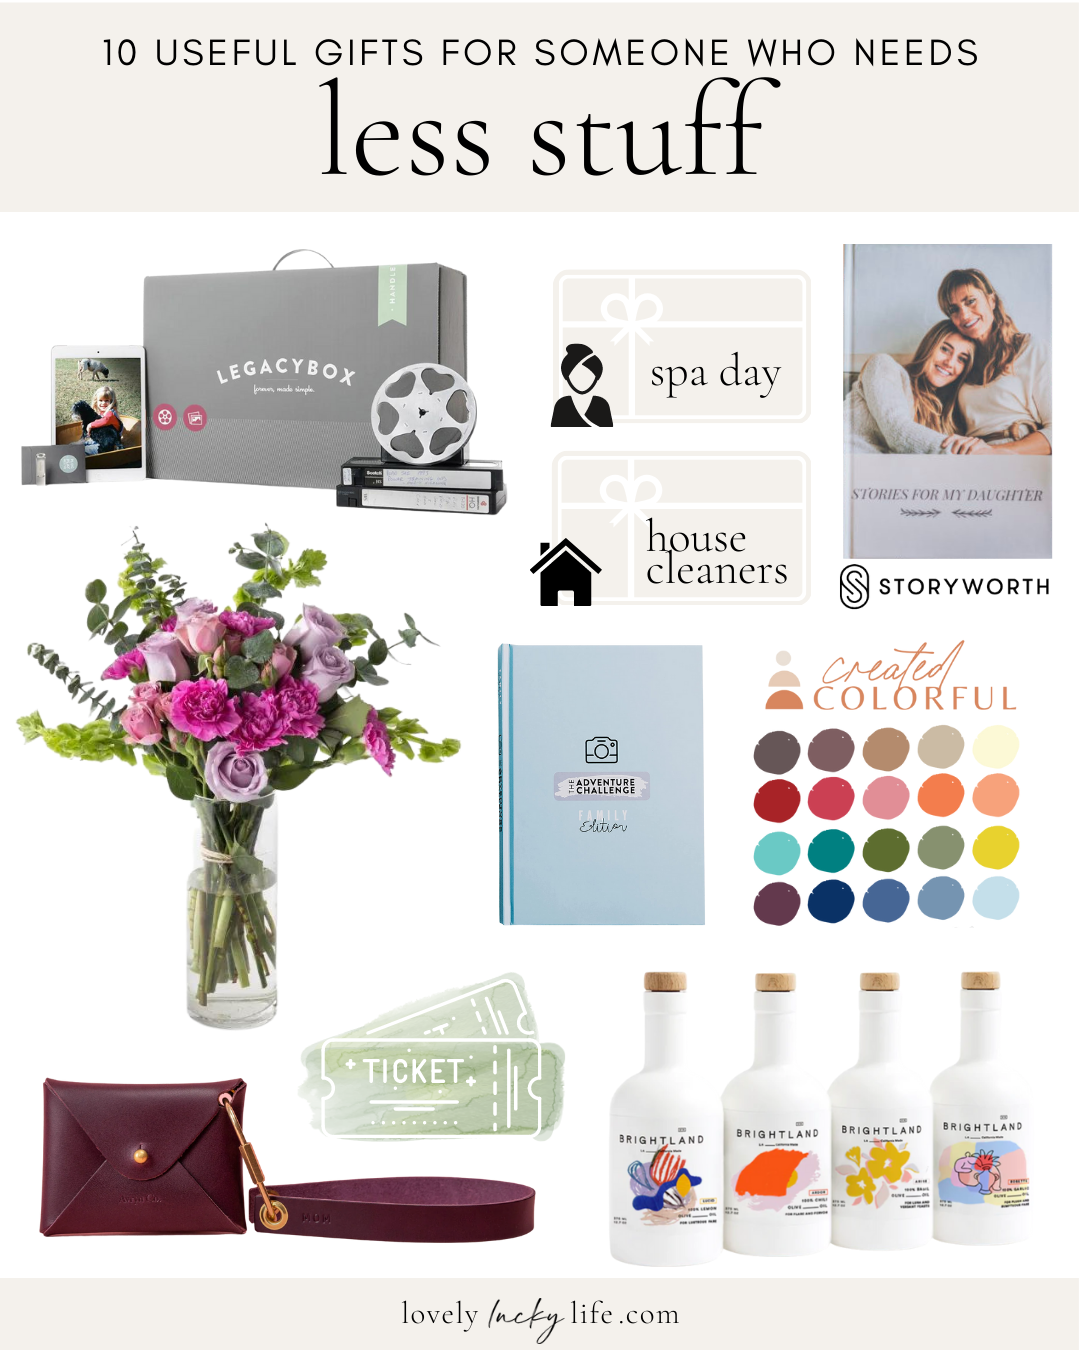 Impressive Gift Ideas for Your Mom or MIL - Lovely Lucky Life